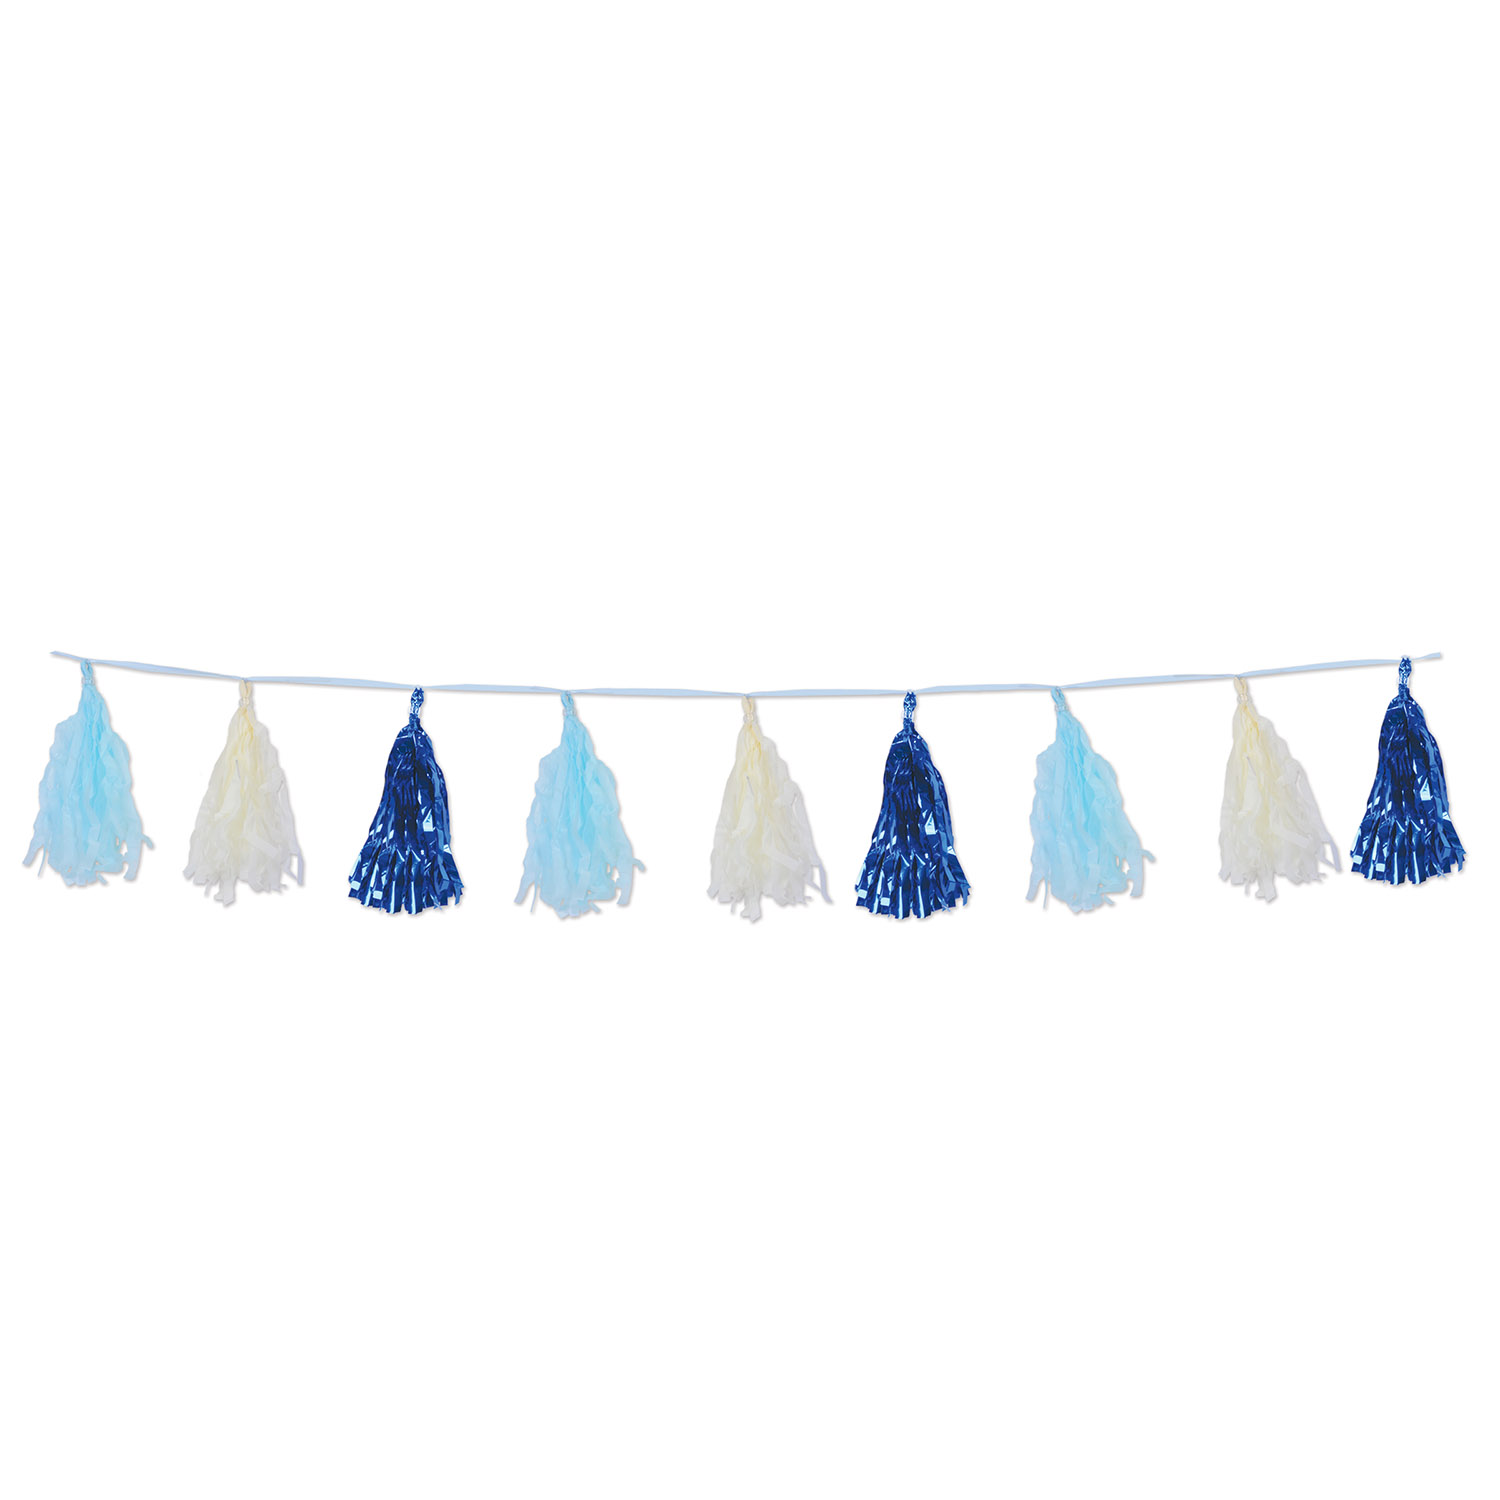 12 Pieces Metallic & Tissue Tassel Garland - Hanging Decorations & Cut Out